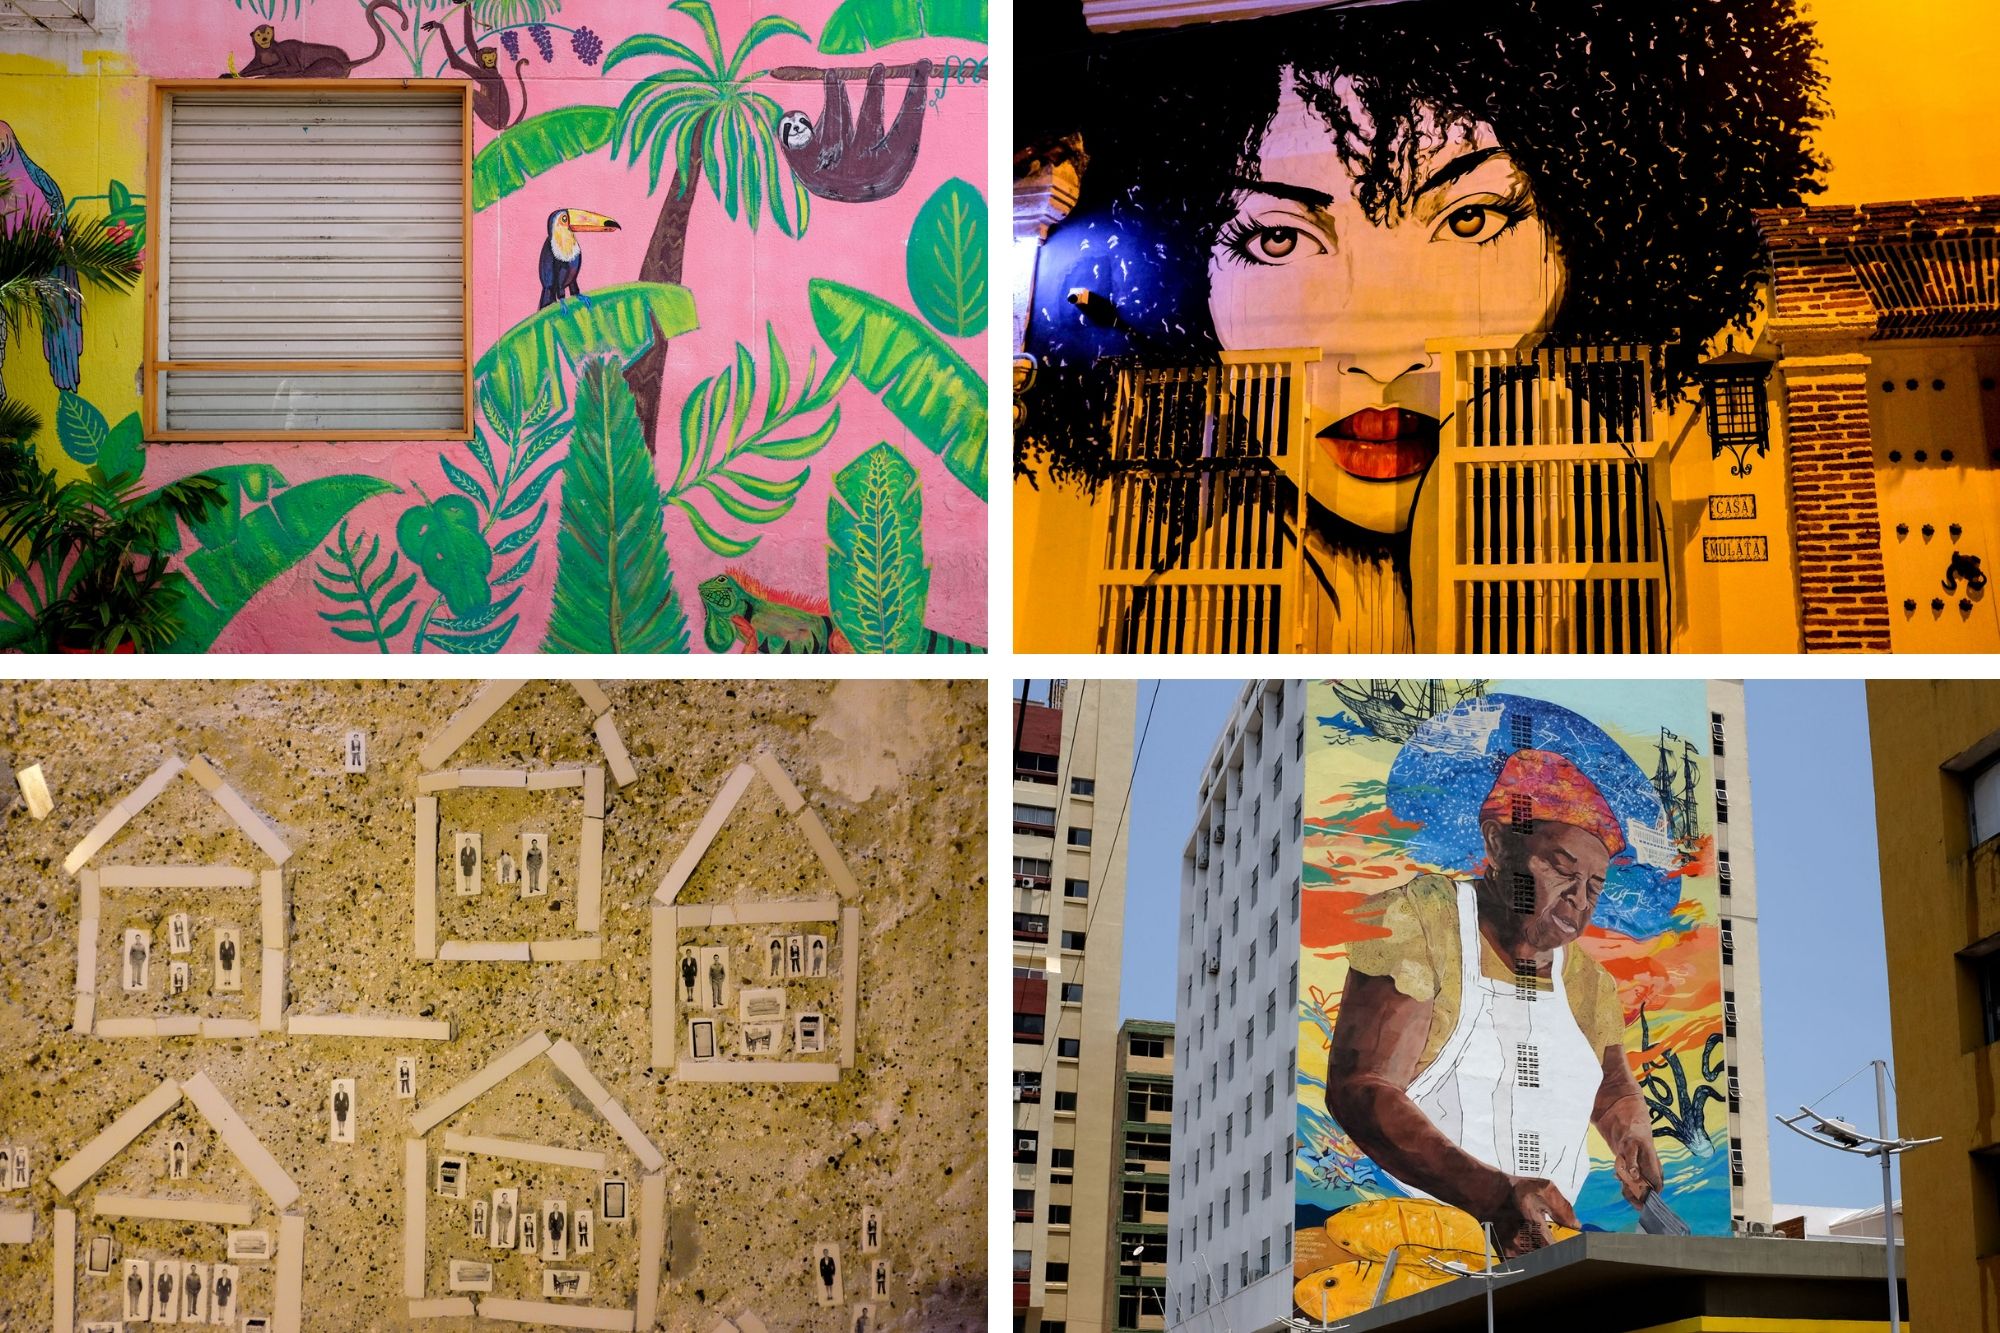 Collage of street art in Cartagena: depicting the park with animals, la Mulata, houses, and a person cleaning fish near the water, and a mosaic of homes